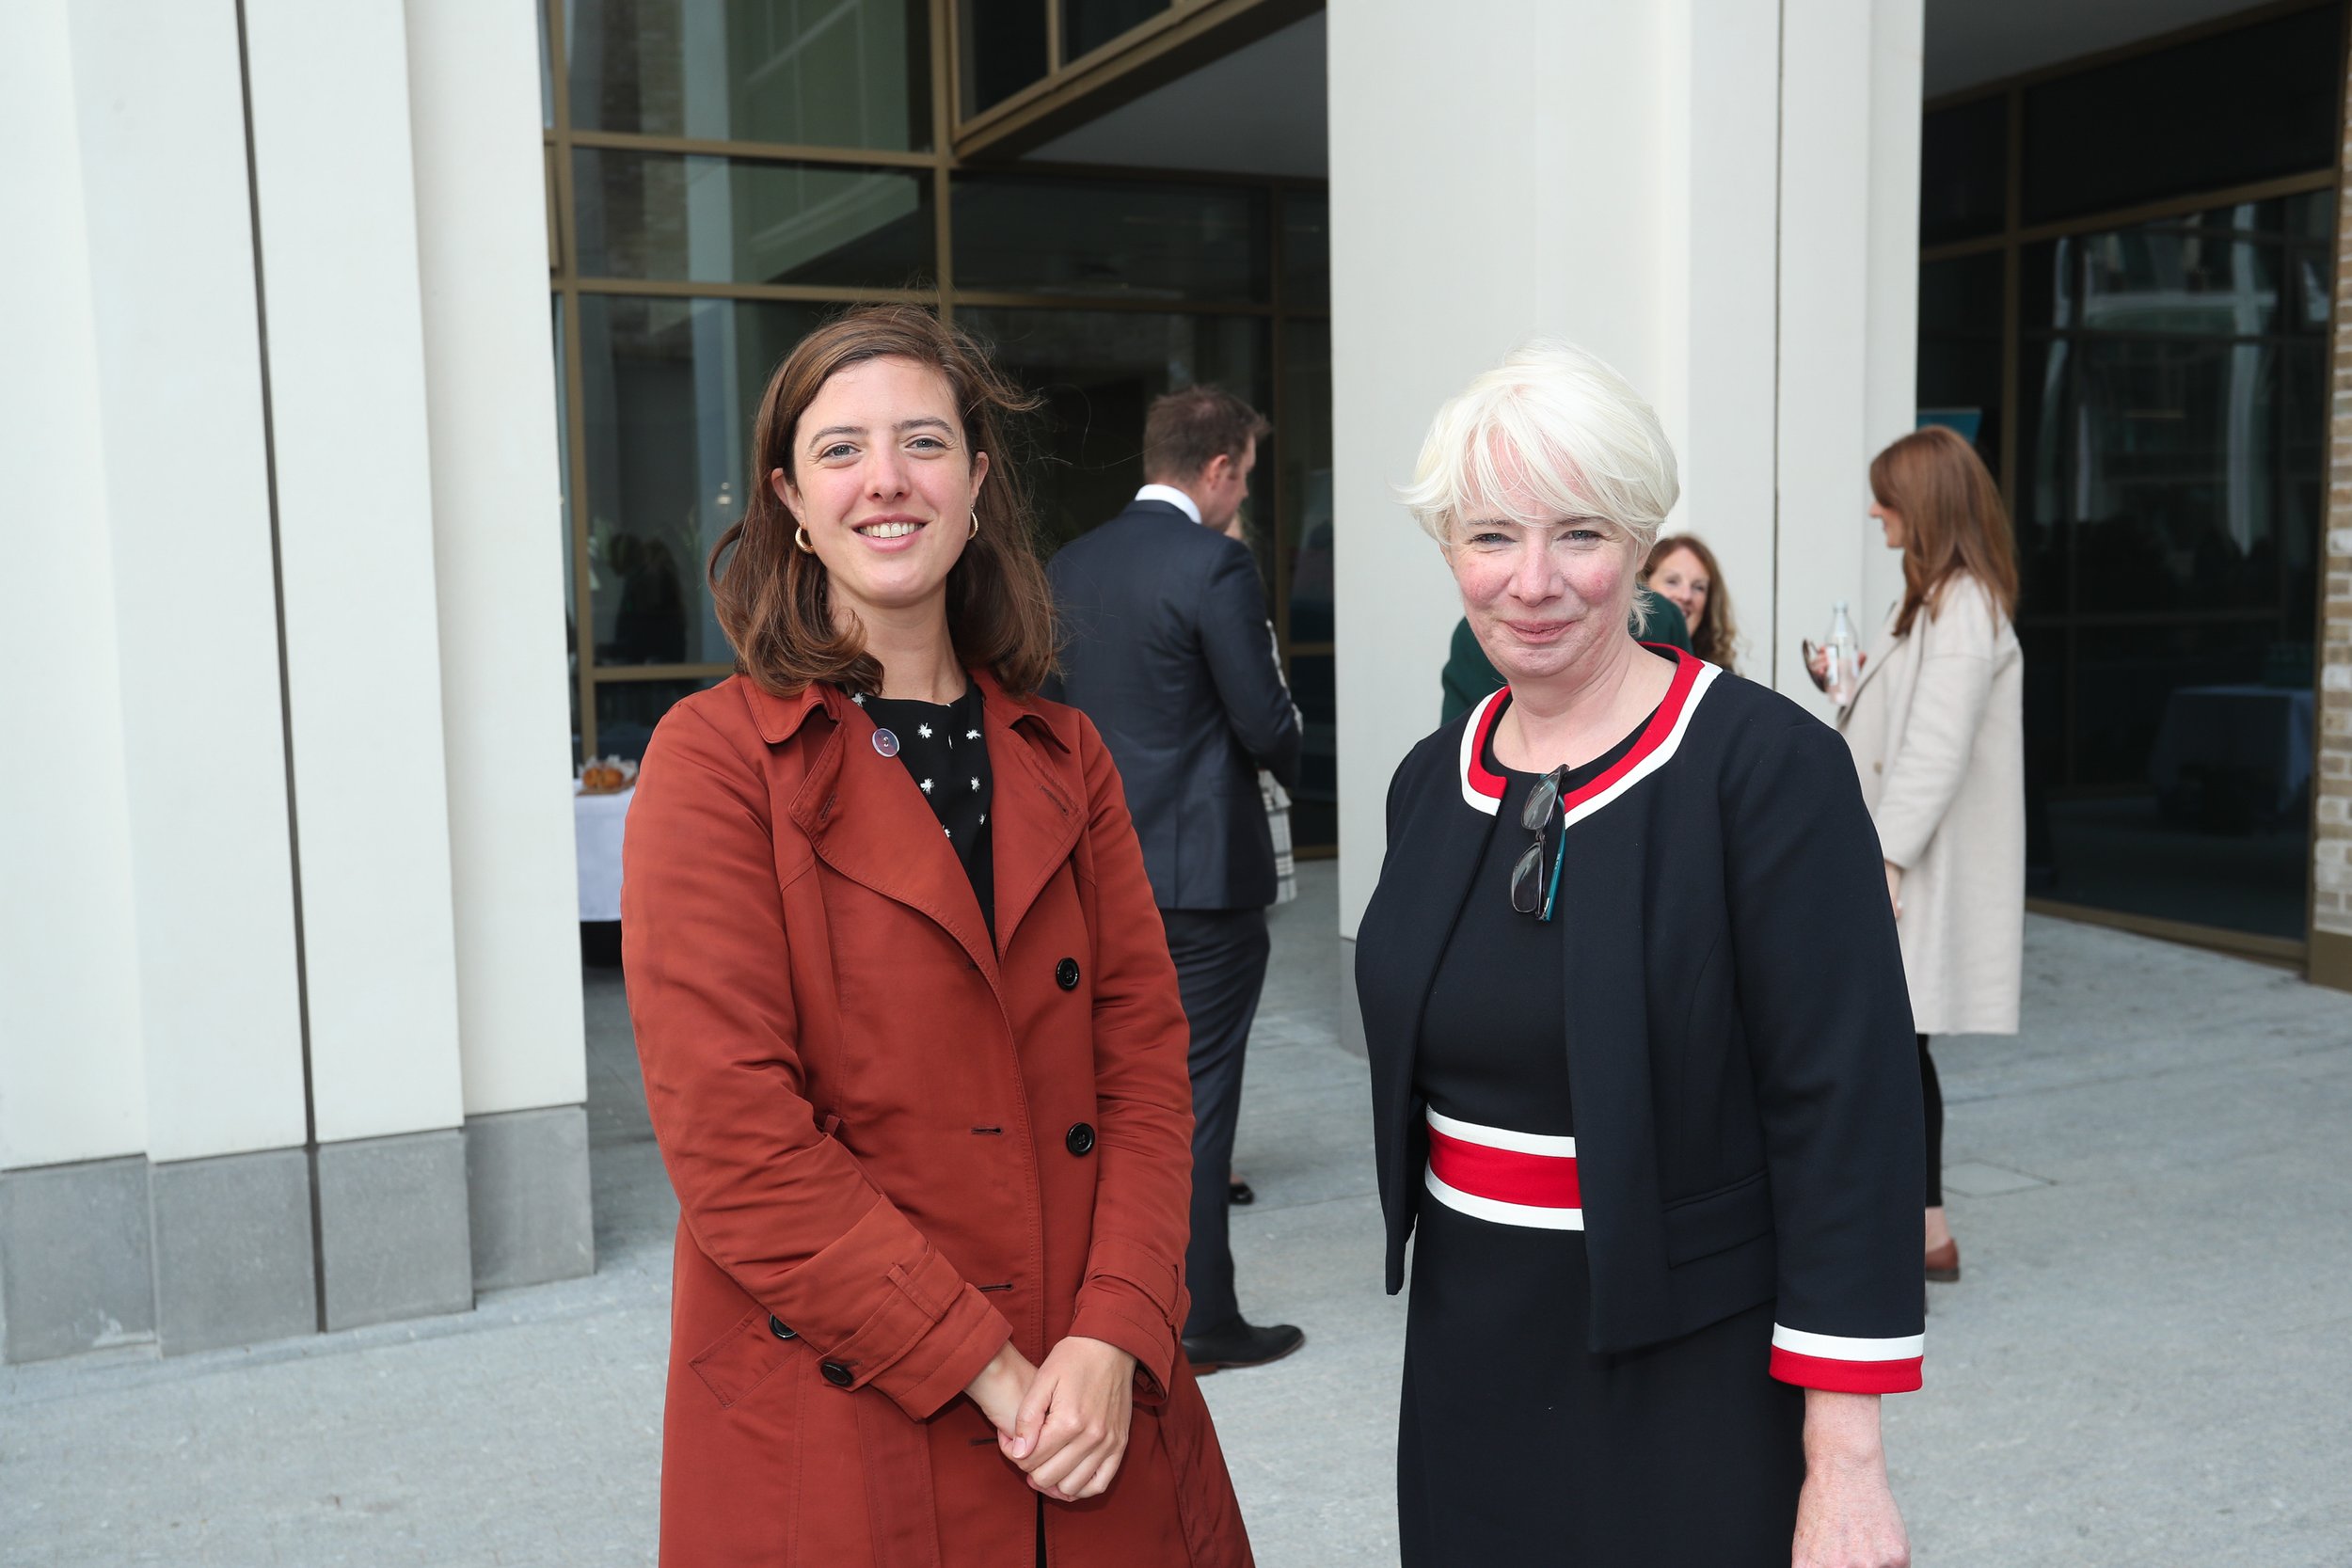  Nora Trench Bowles, Head of Lifelong Learning, Skills and Quality, Irish Universities Association with Dr. Deirdre Lillis, Convene Lead – TU Dublin. 